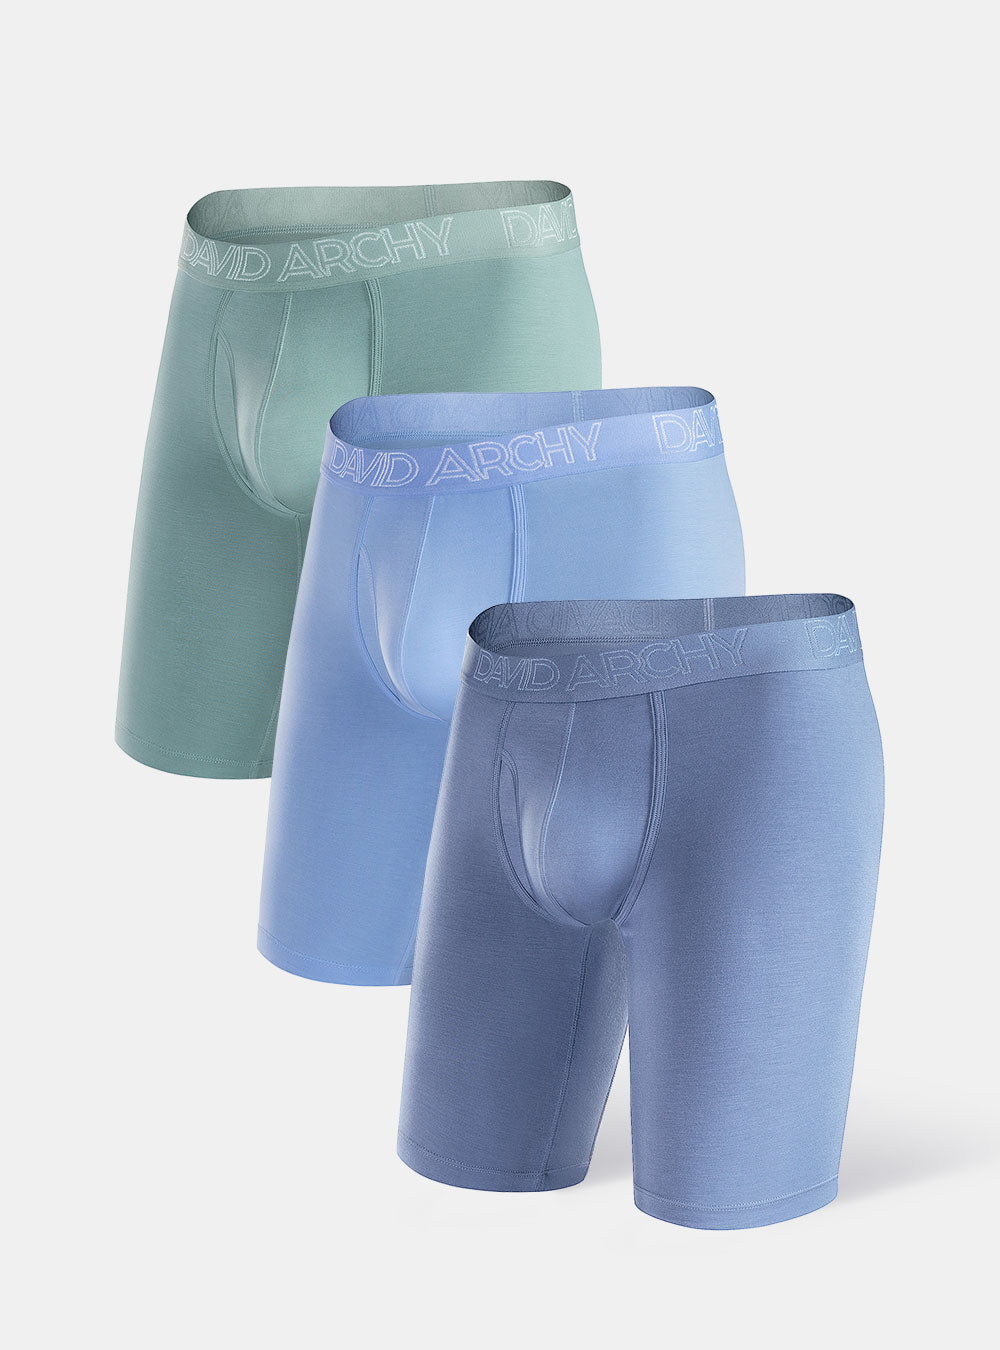 Bamboo Rayon Breathable Boxer Briefs 3 Pack